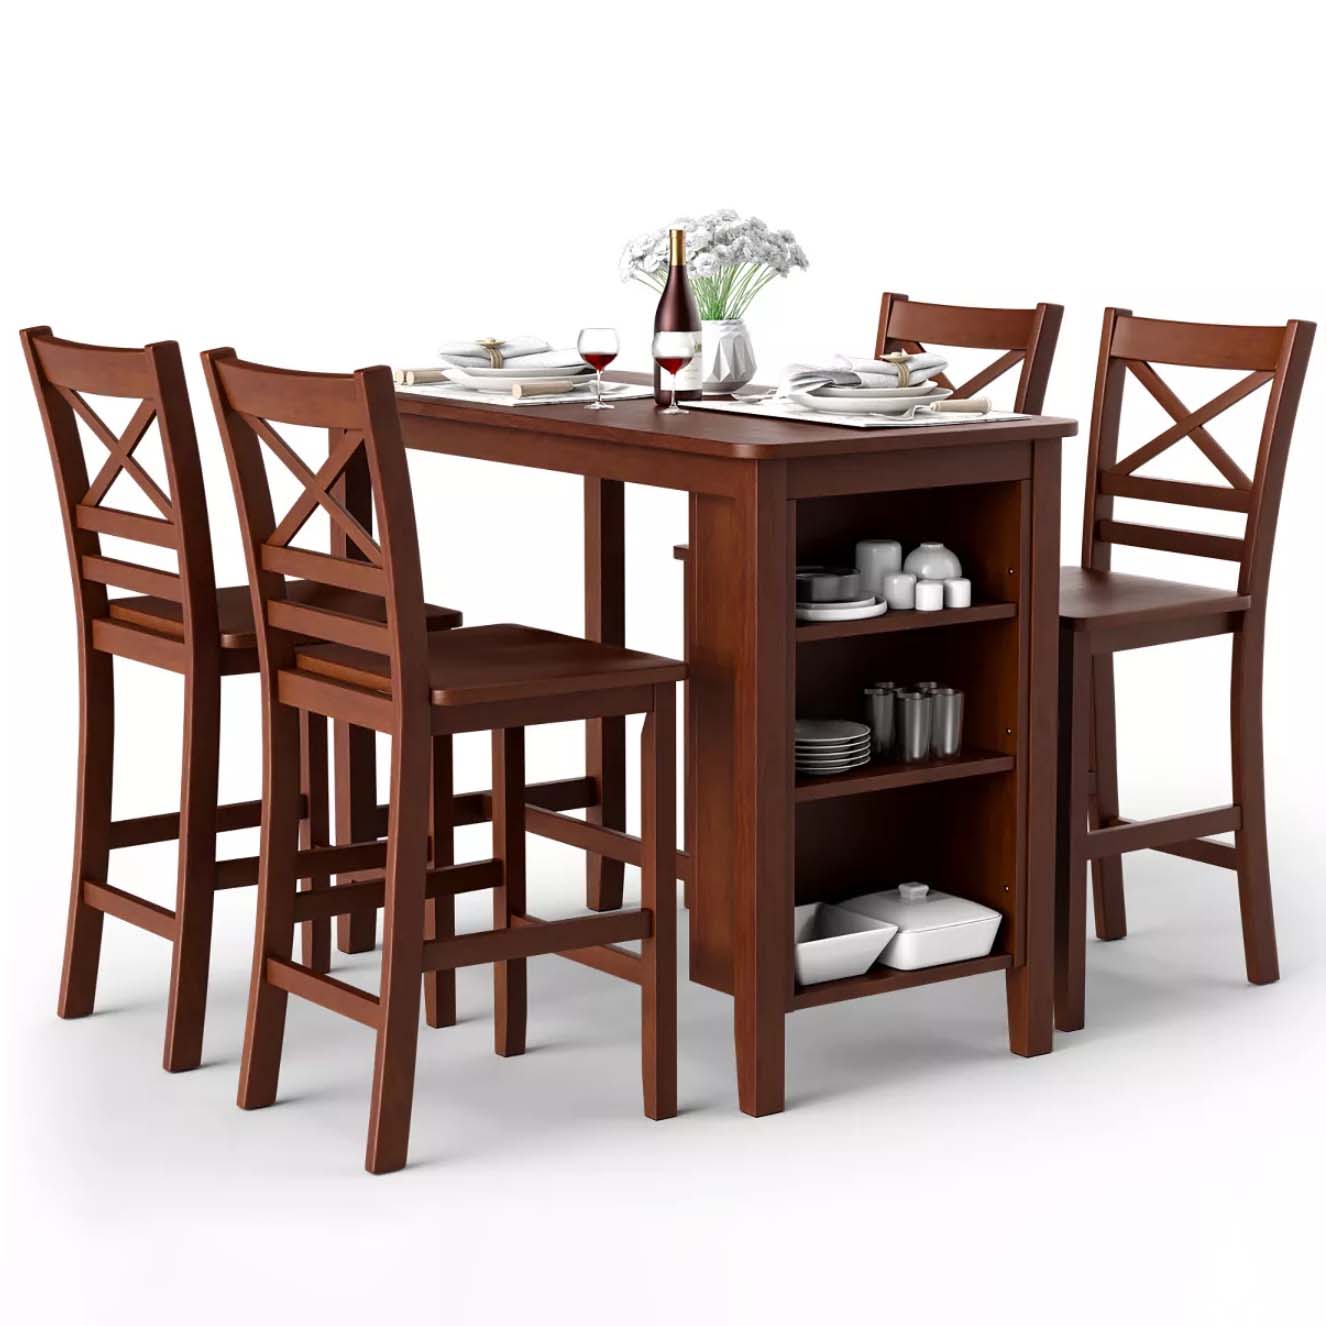 Pub dining table with four chairs in dark wood